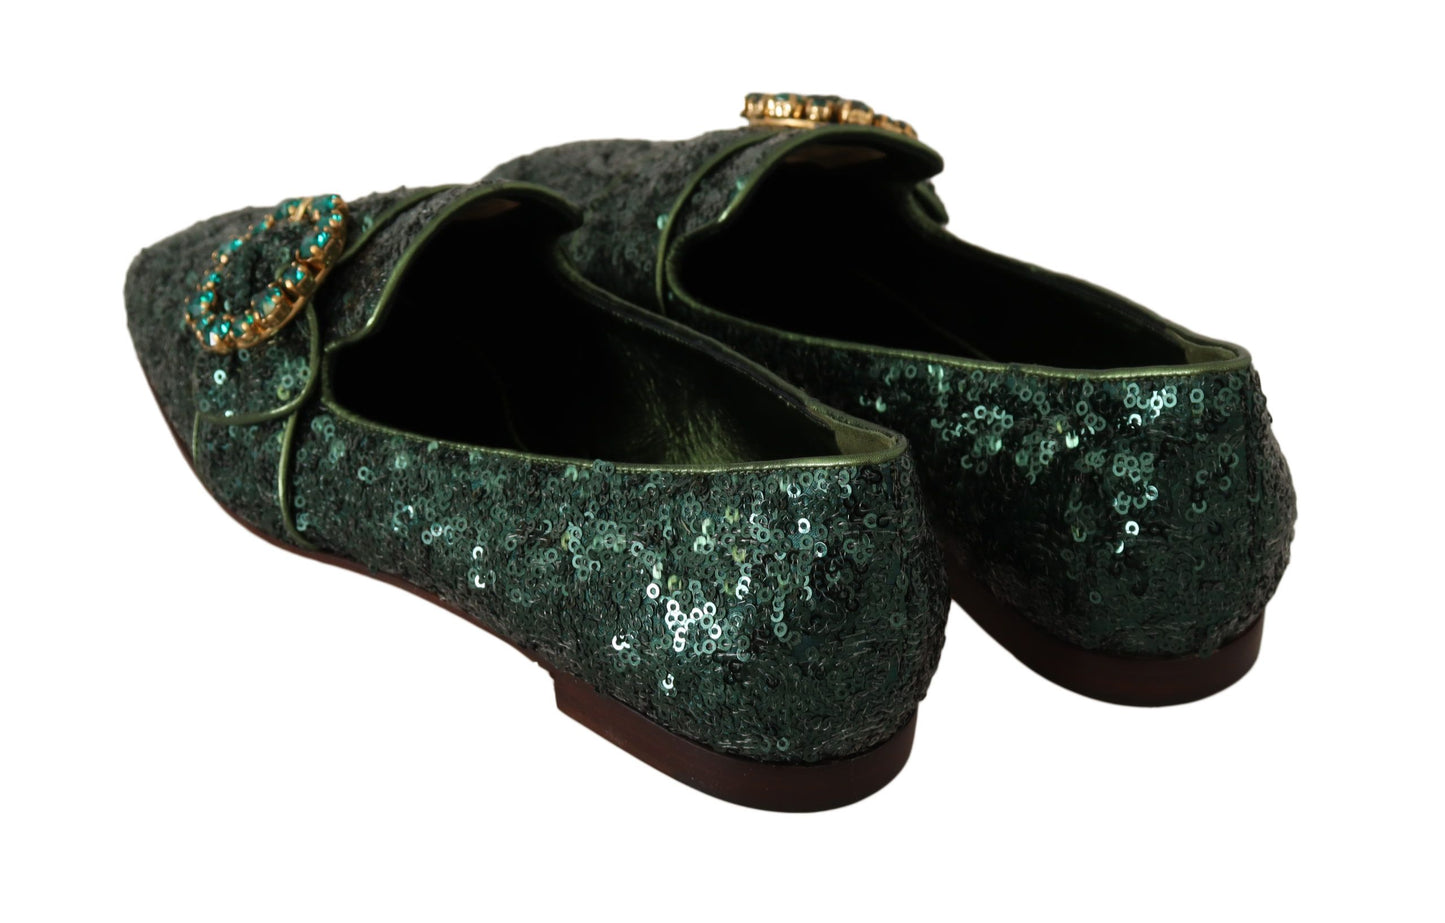 Emerald Sequined Loafers with Crystal Gems